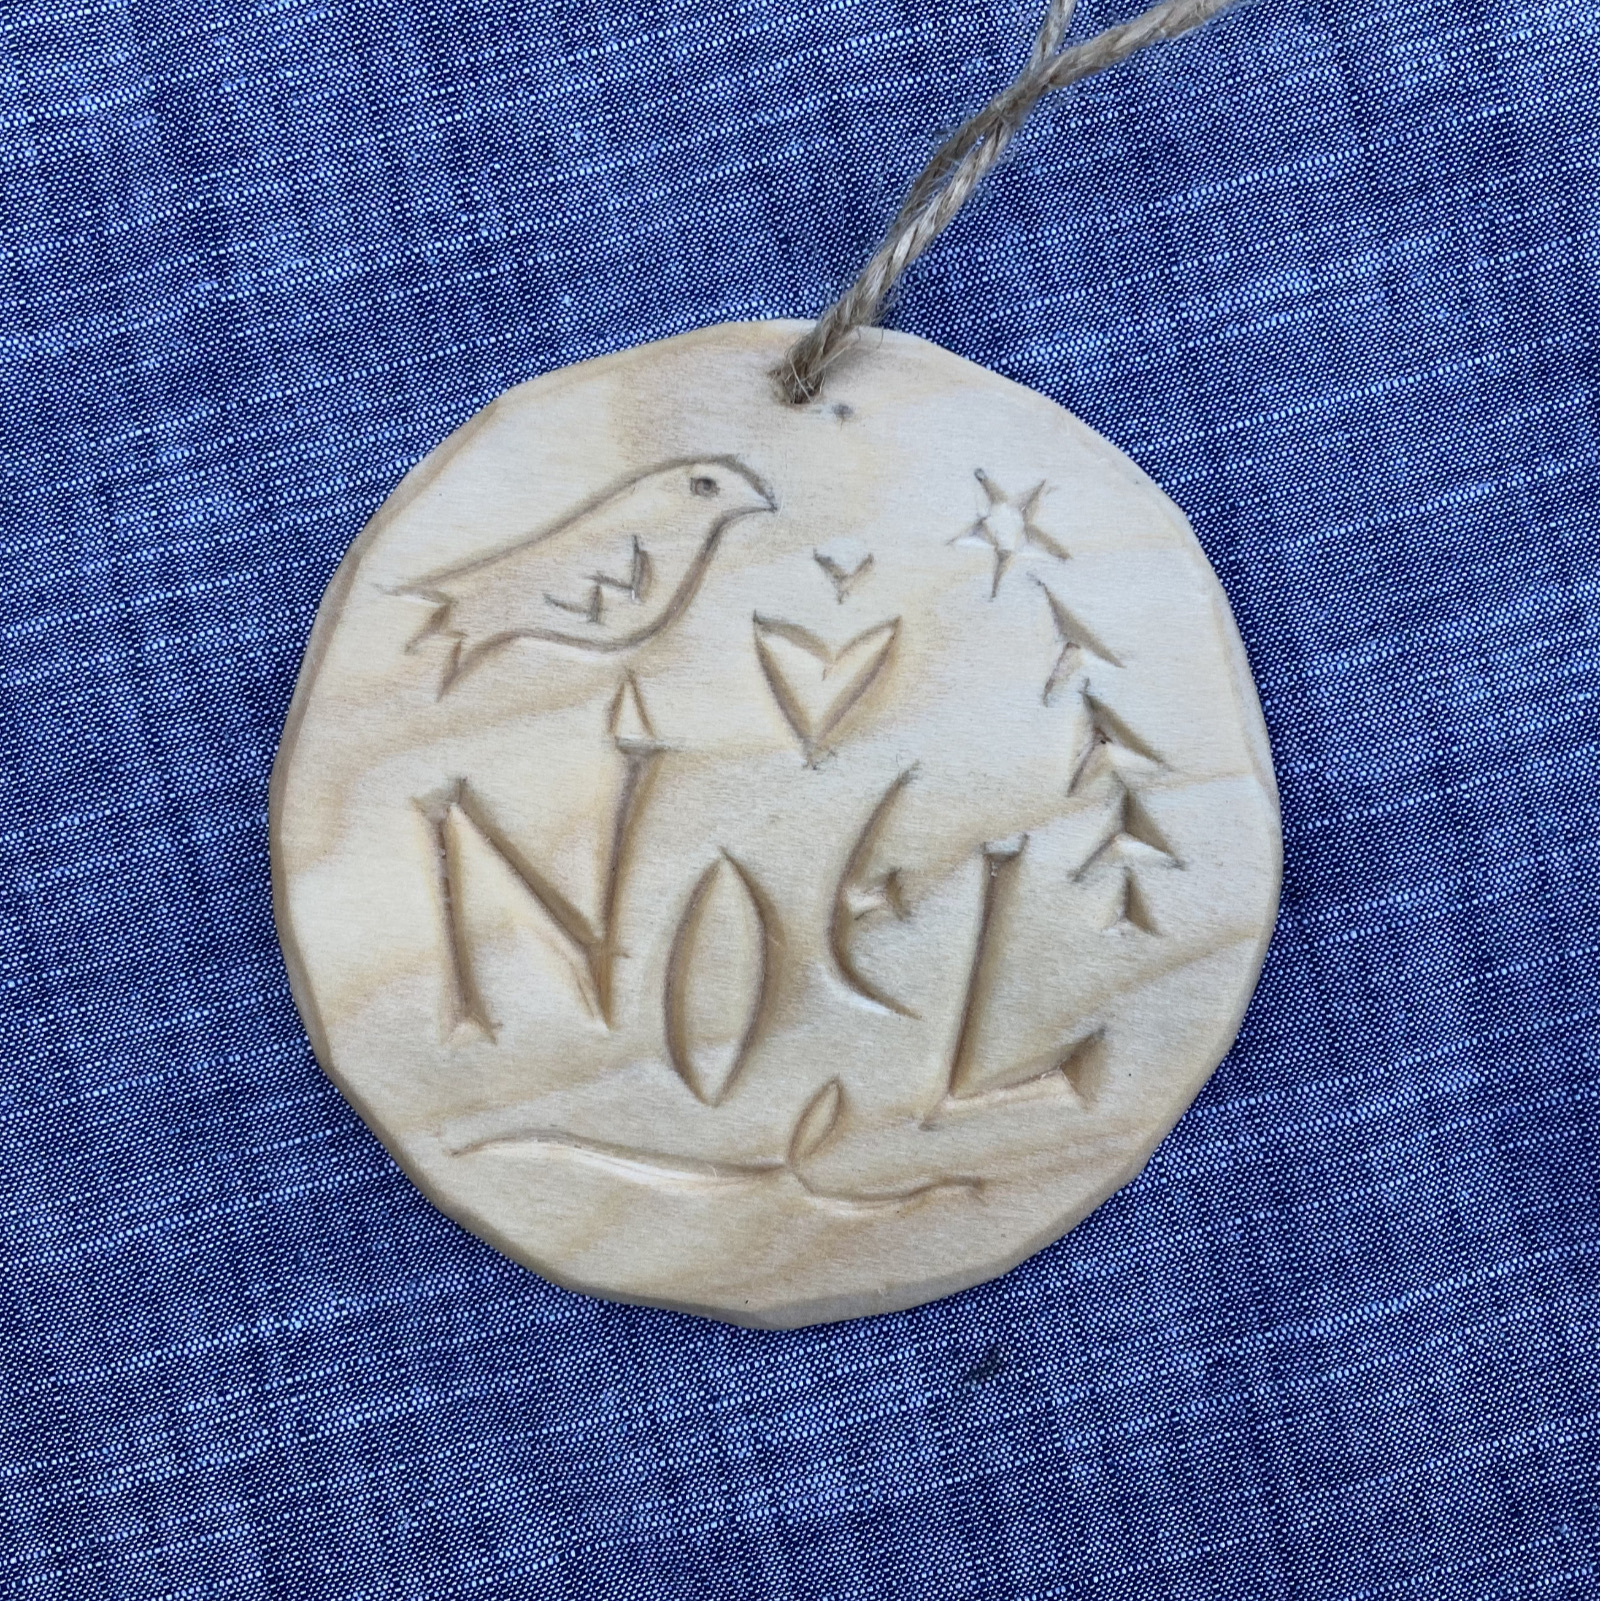 chip-carved tree ornament with legend Noel, tree, bird, hearts